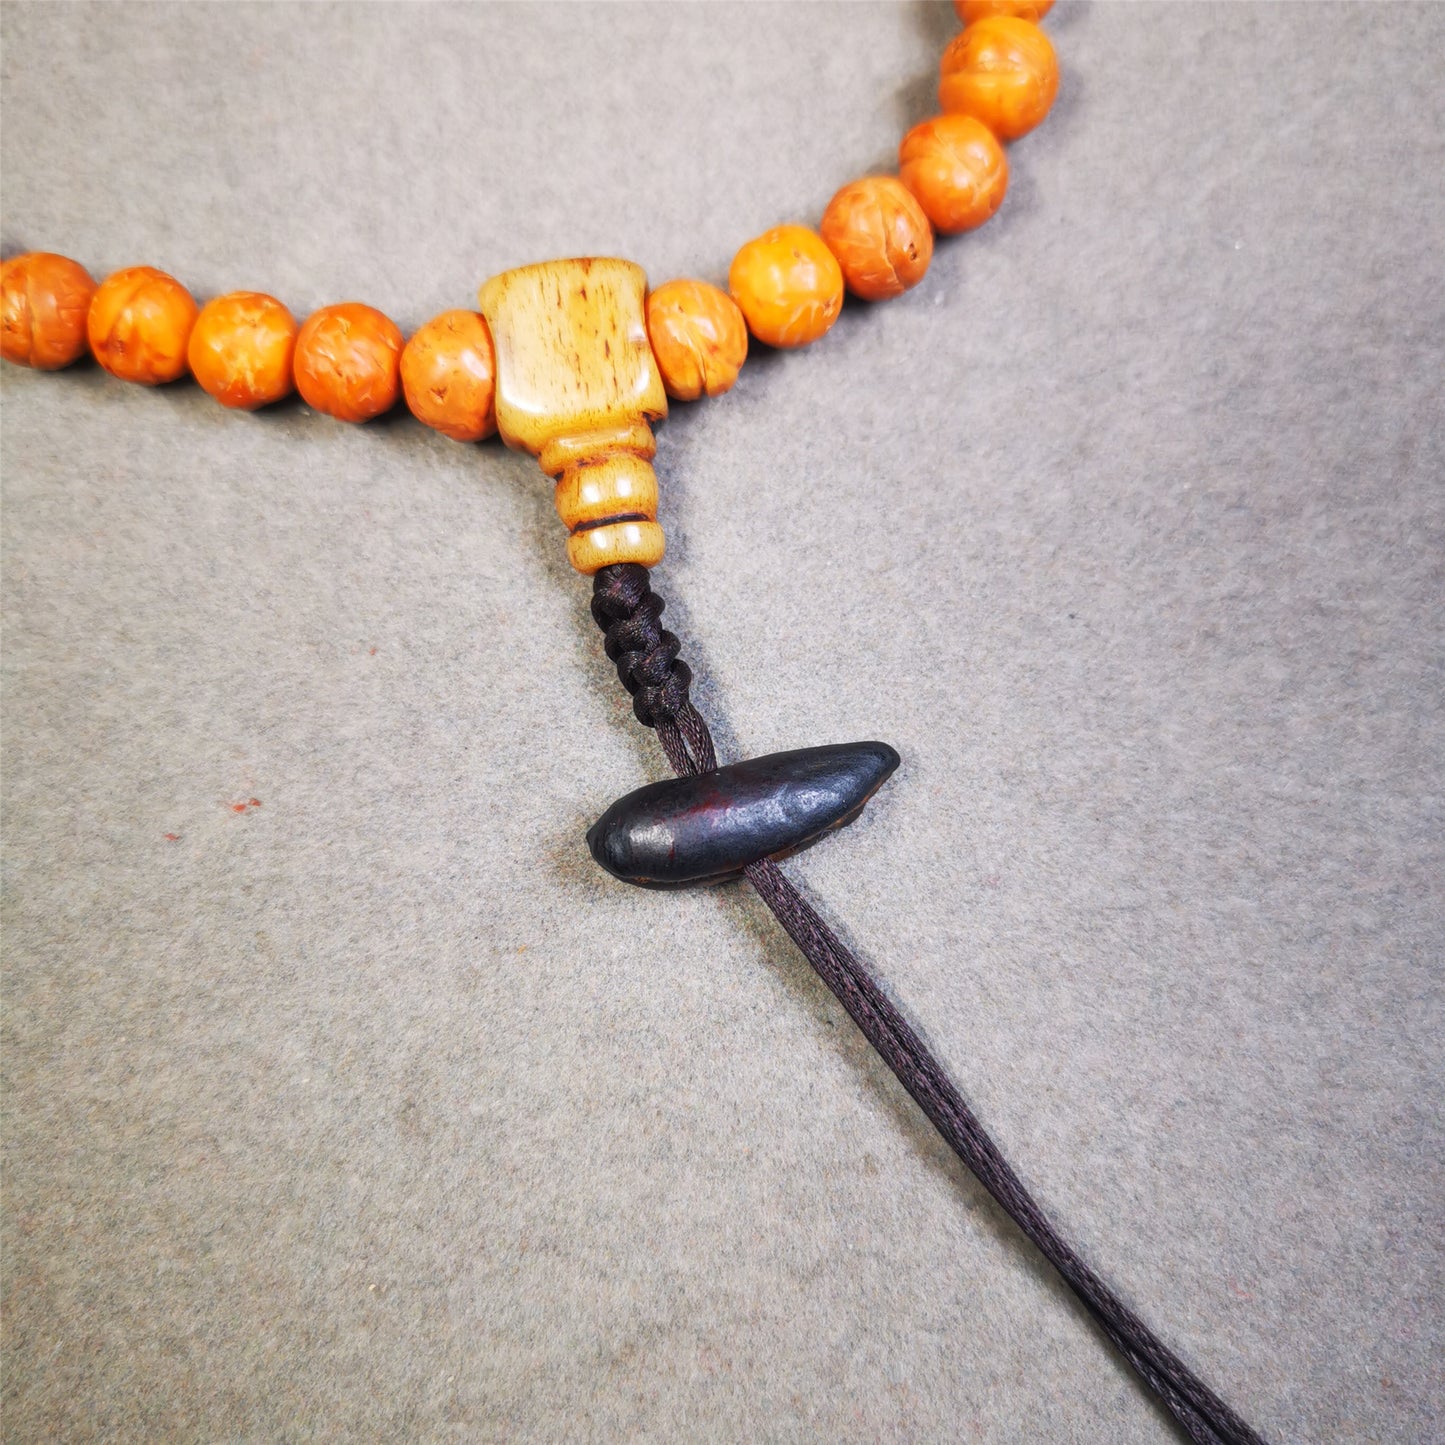 These highland barley seeds come from the Kathok Monastery and are one of the tributes offered in front of the Buddha.  You can make it as a mala pendant below the guru bead, or spacer bead on mala. Also can be use as pendant or keychain.